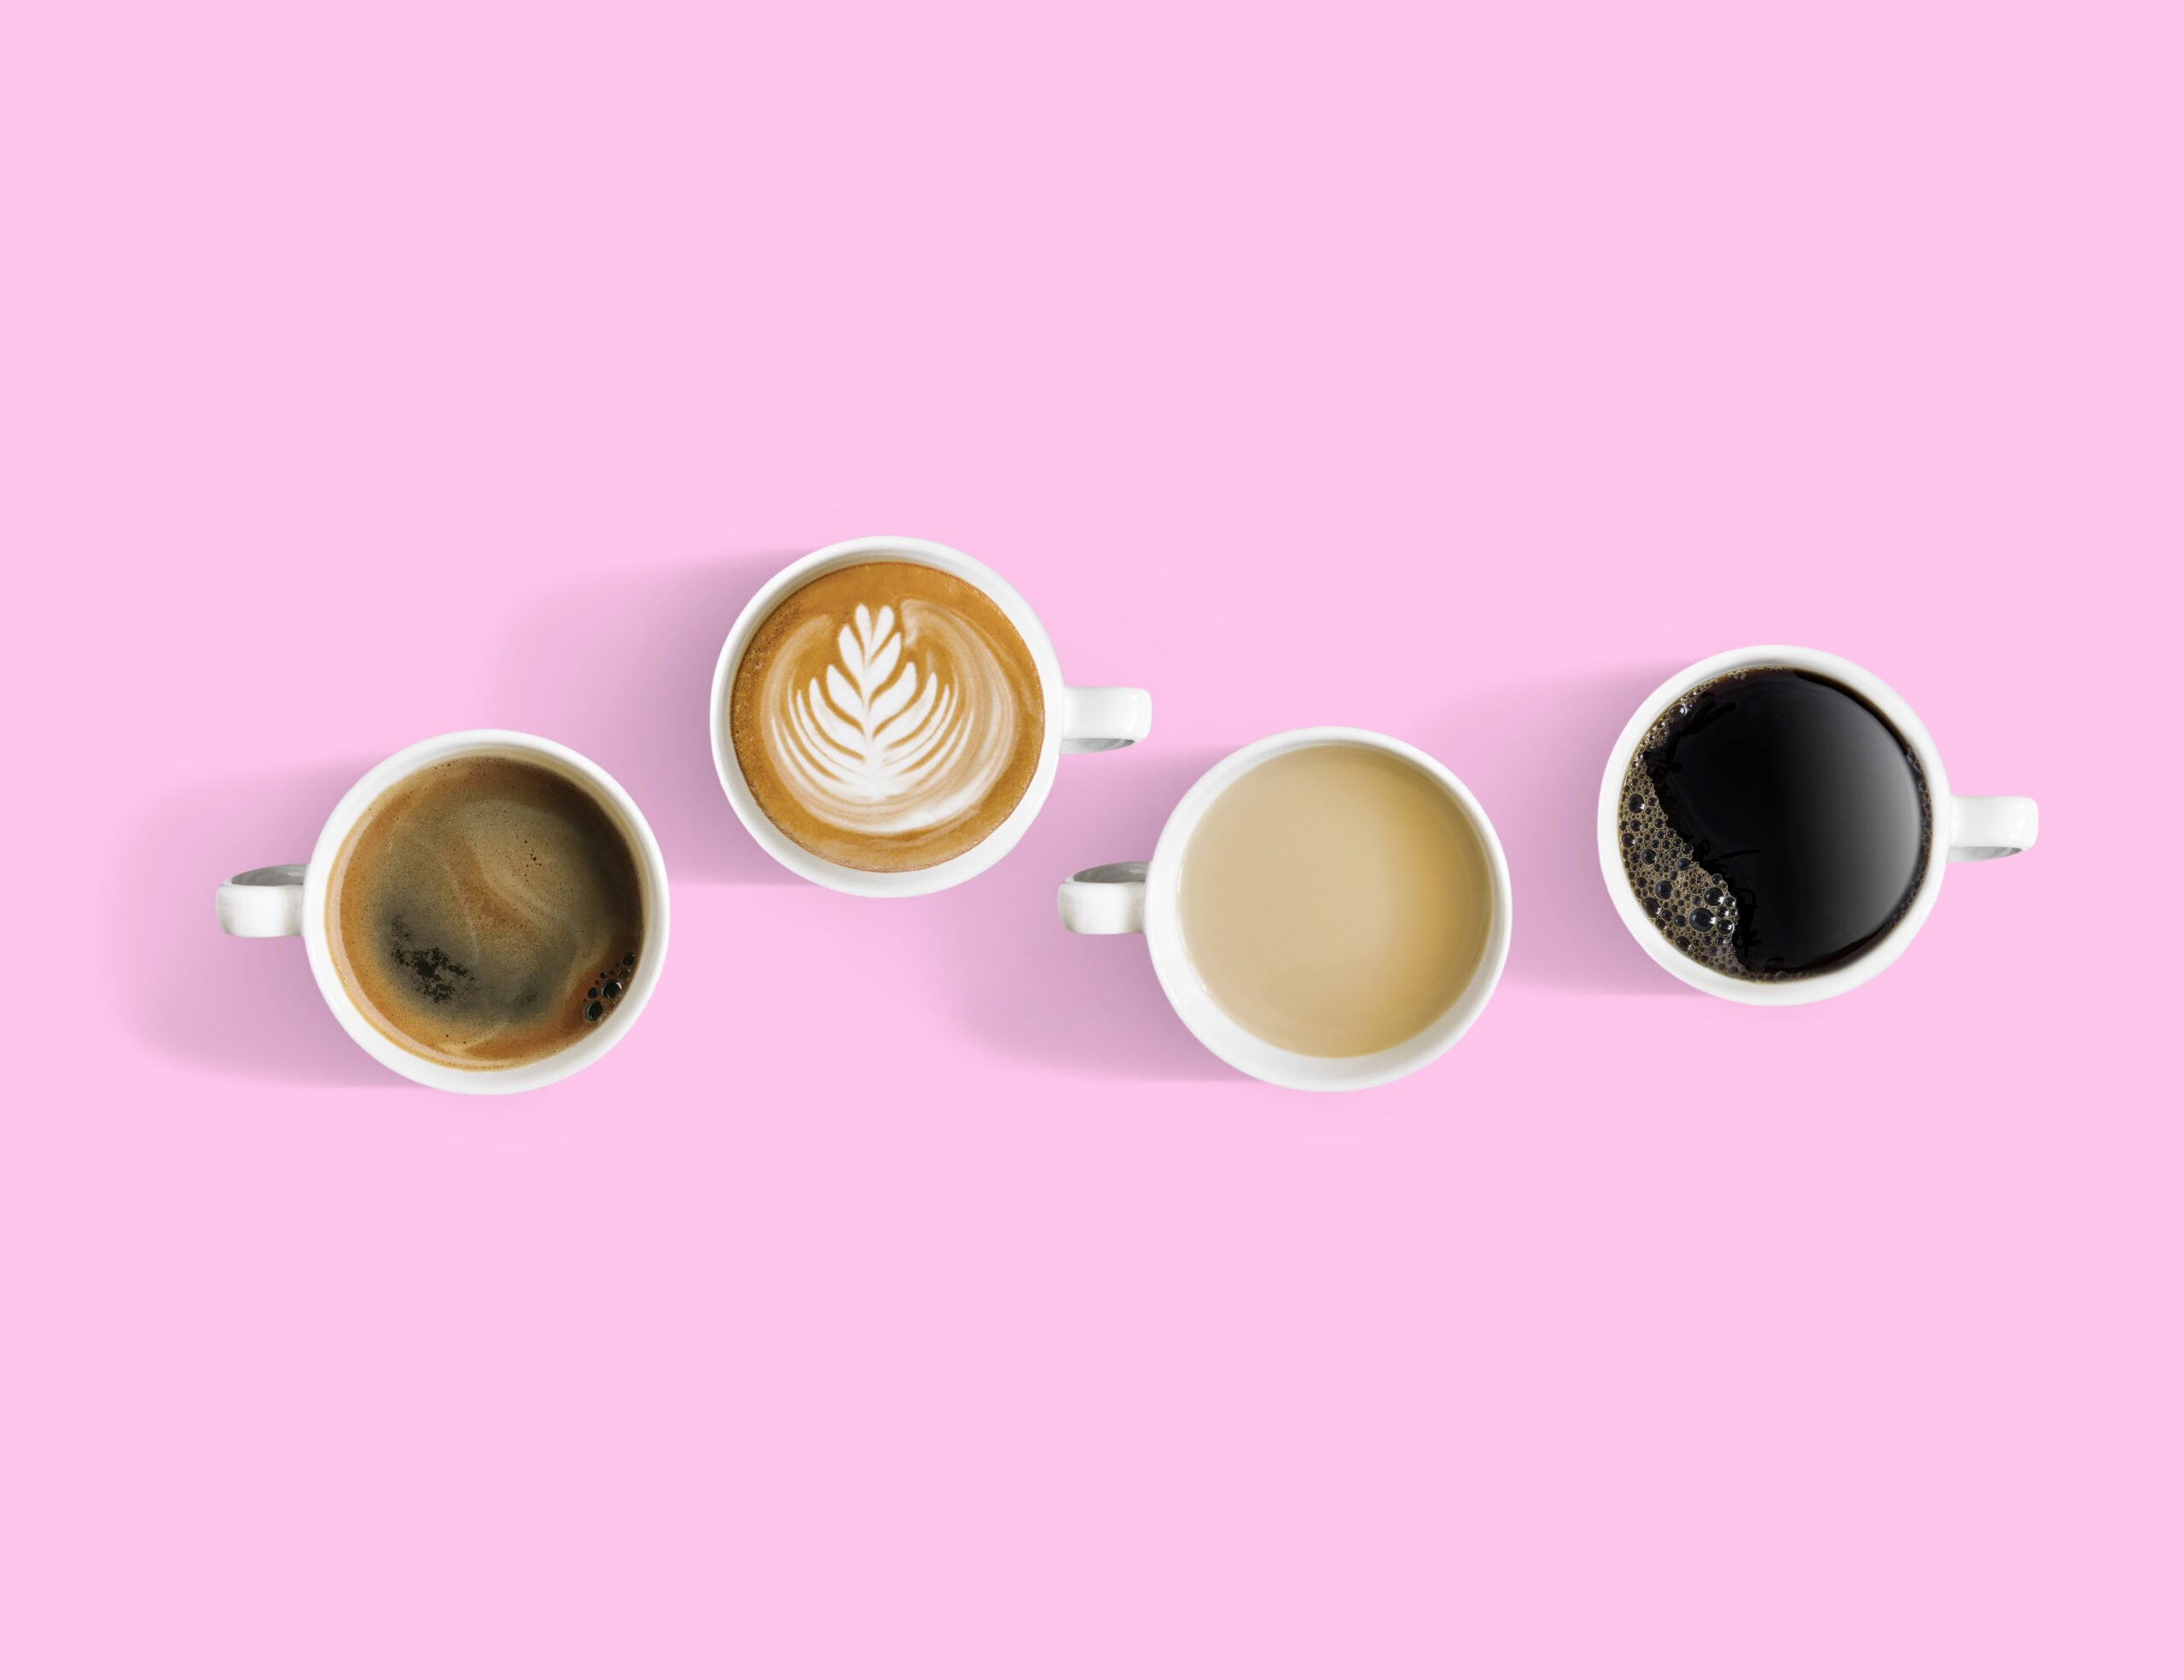 Overlooking coffee cups with different types of coffee